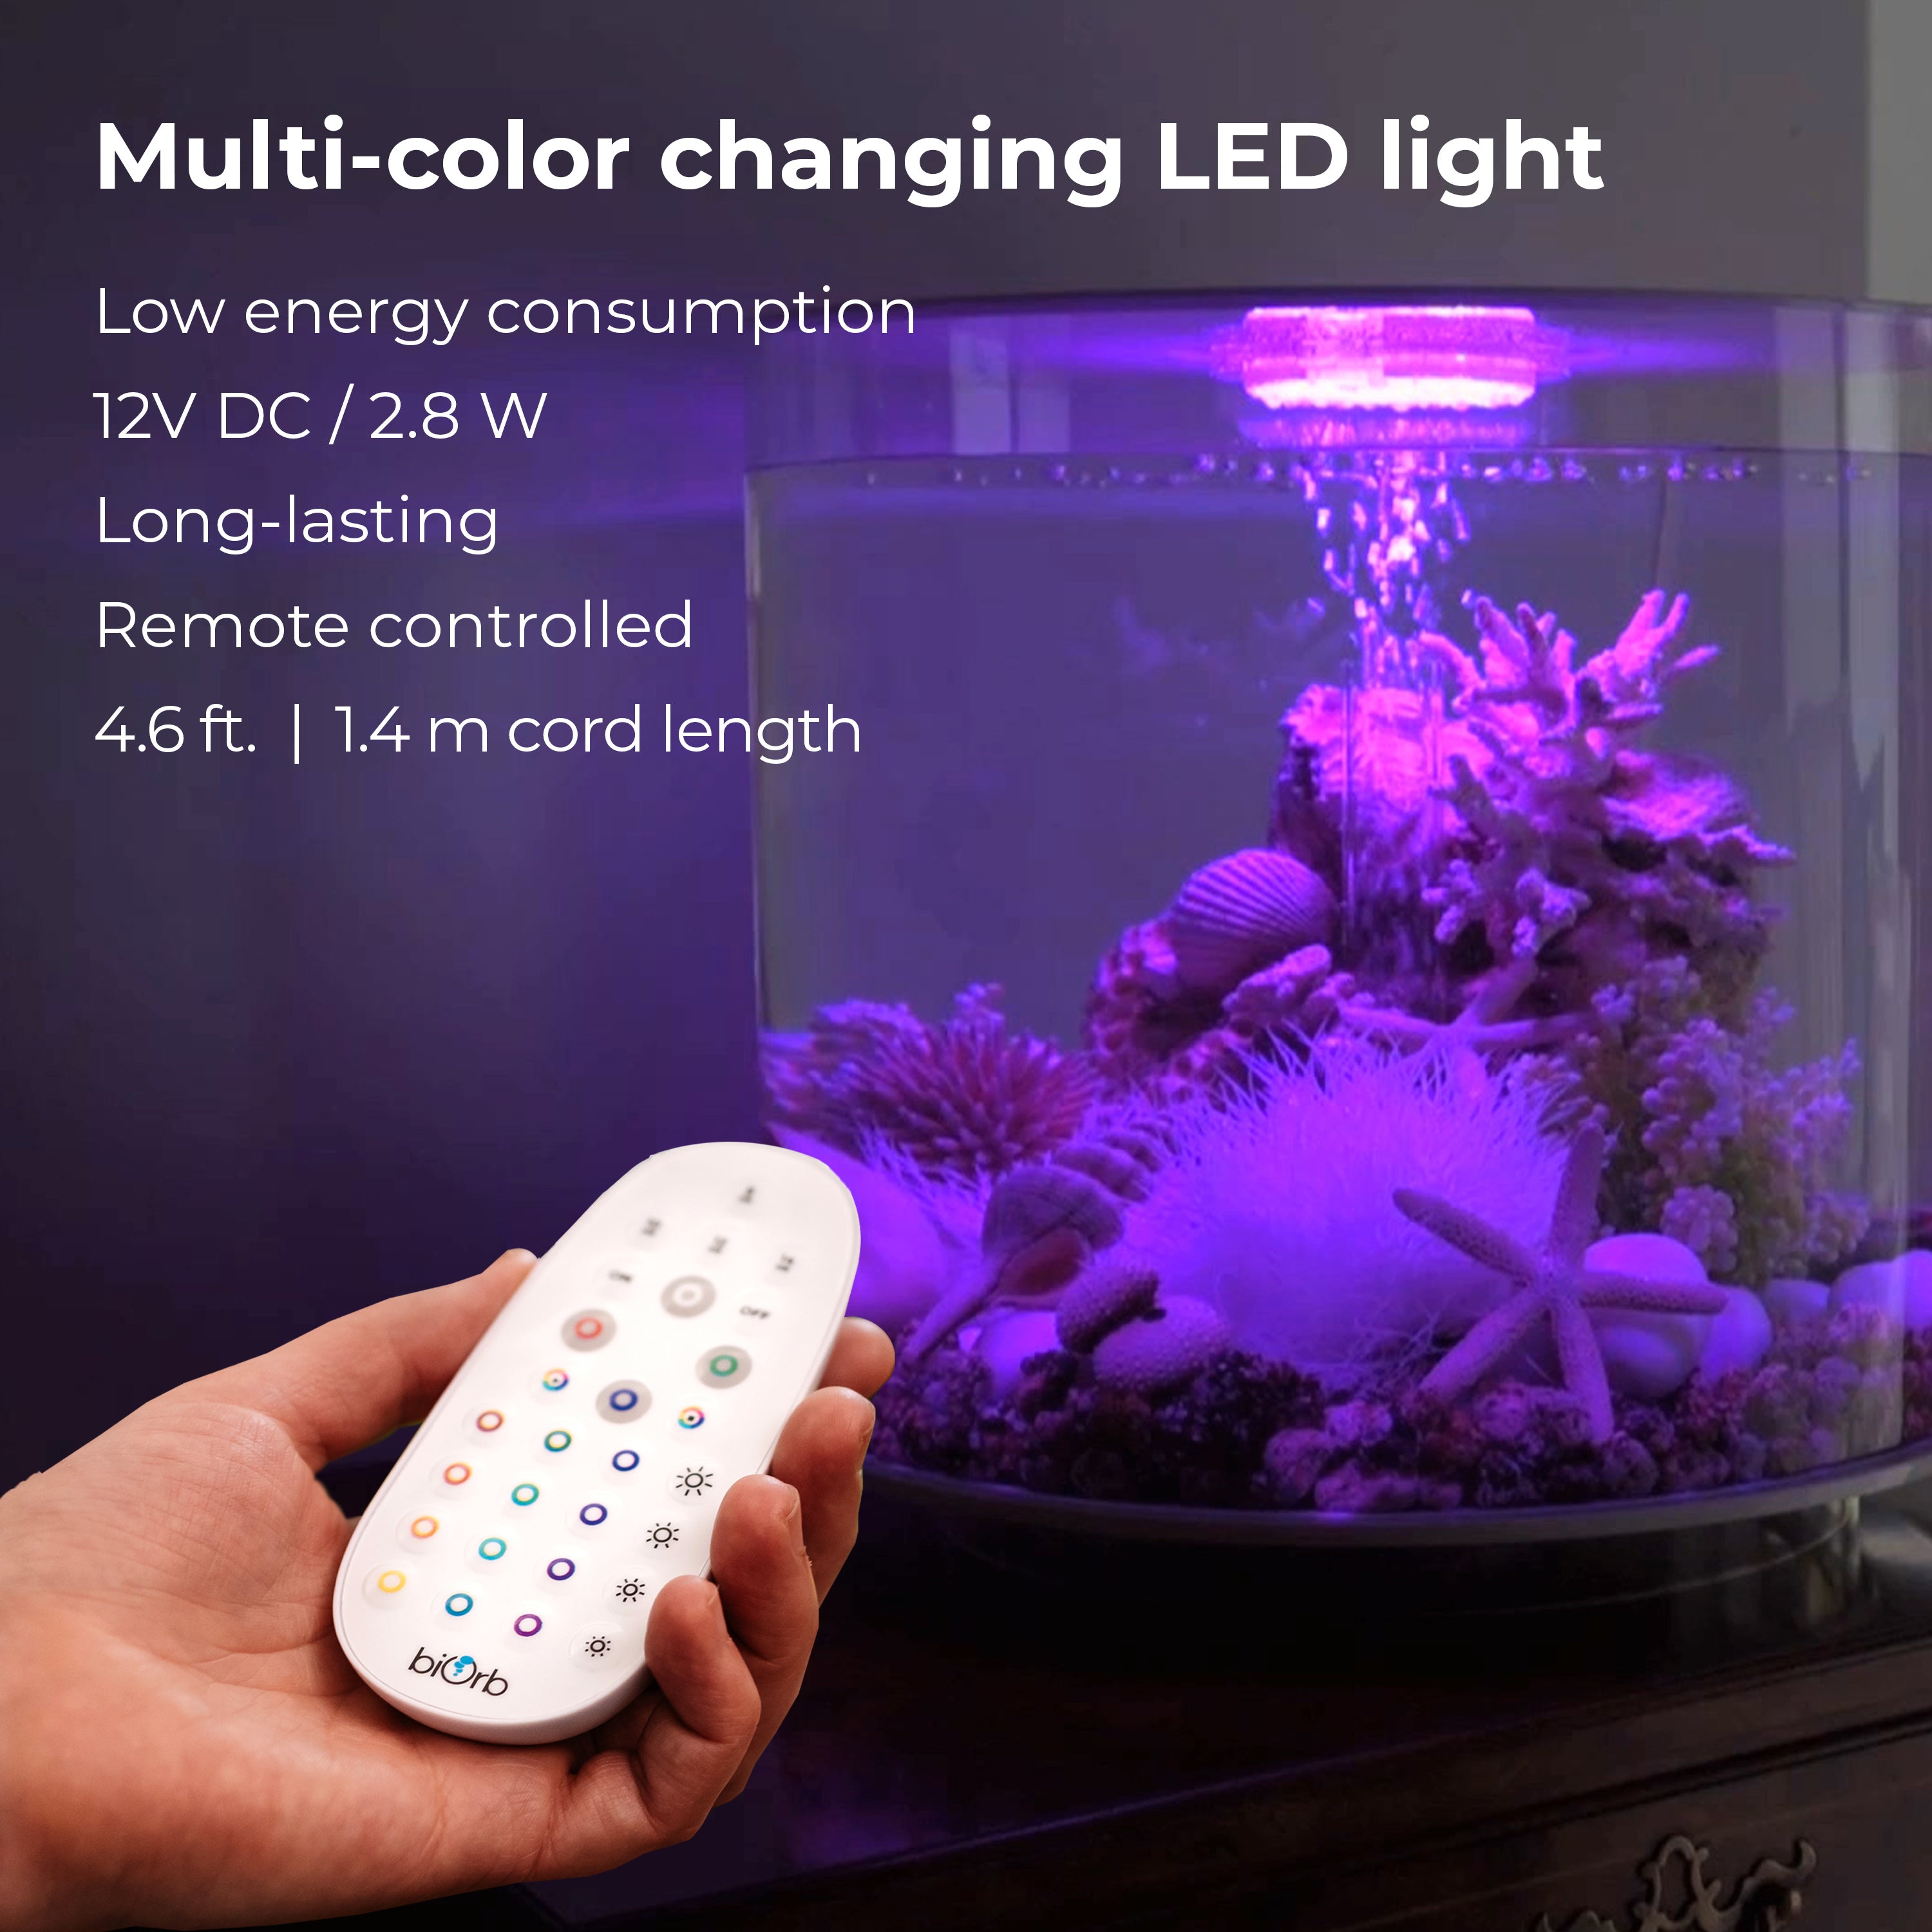 MCR LED Small Light Accessory - Multi-color changing LED light